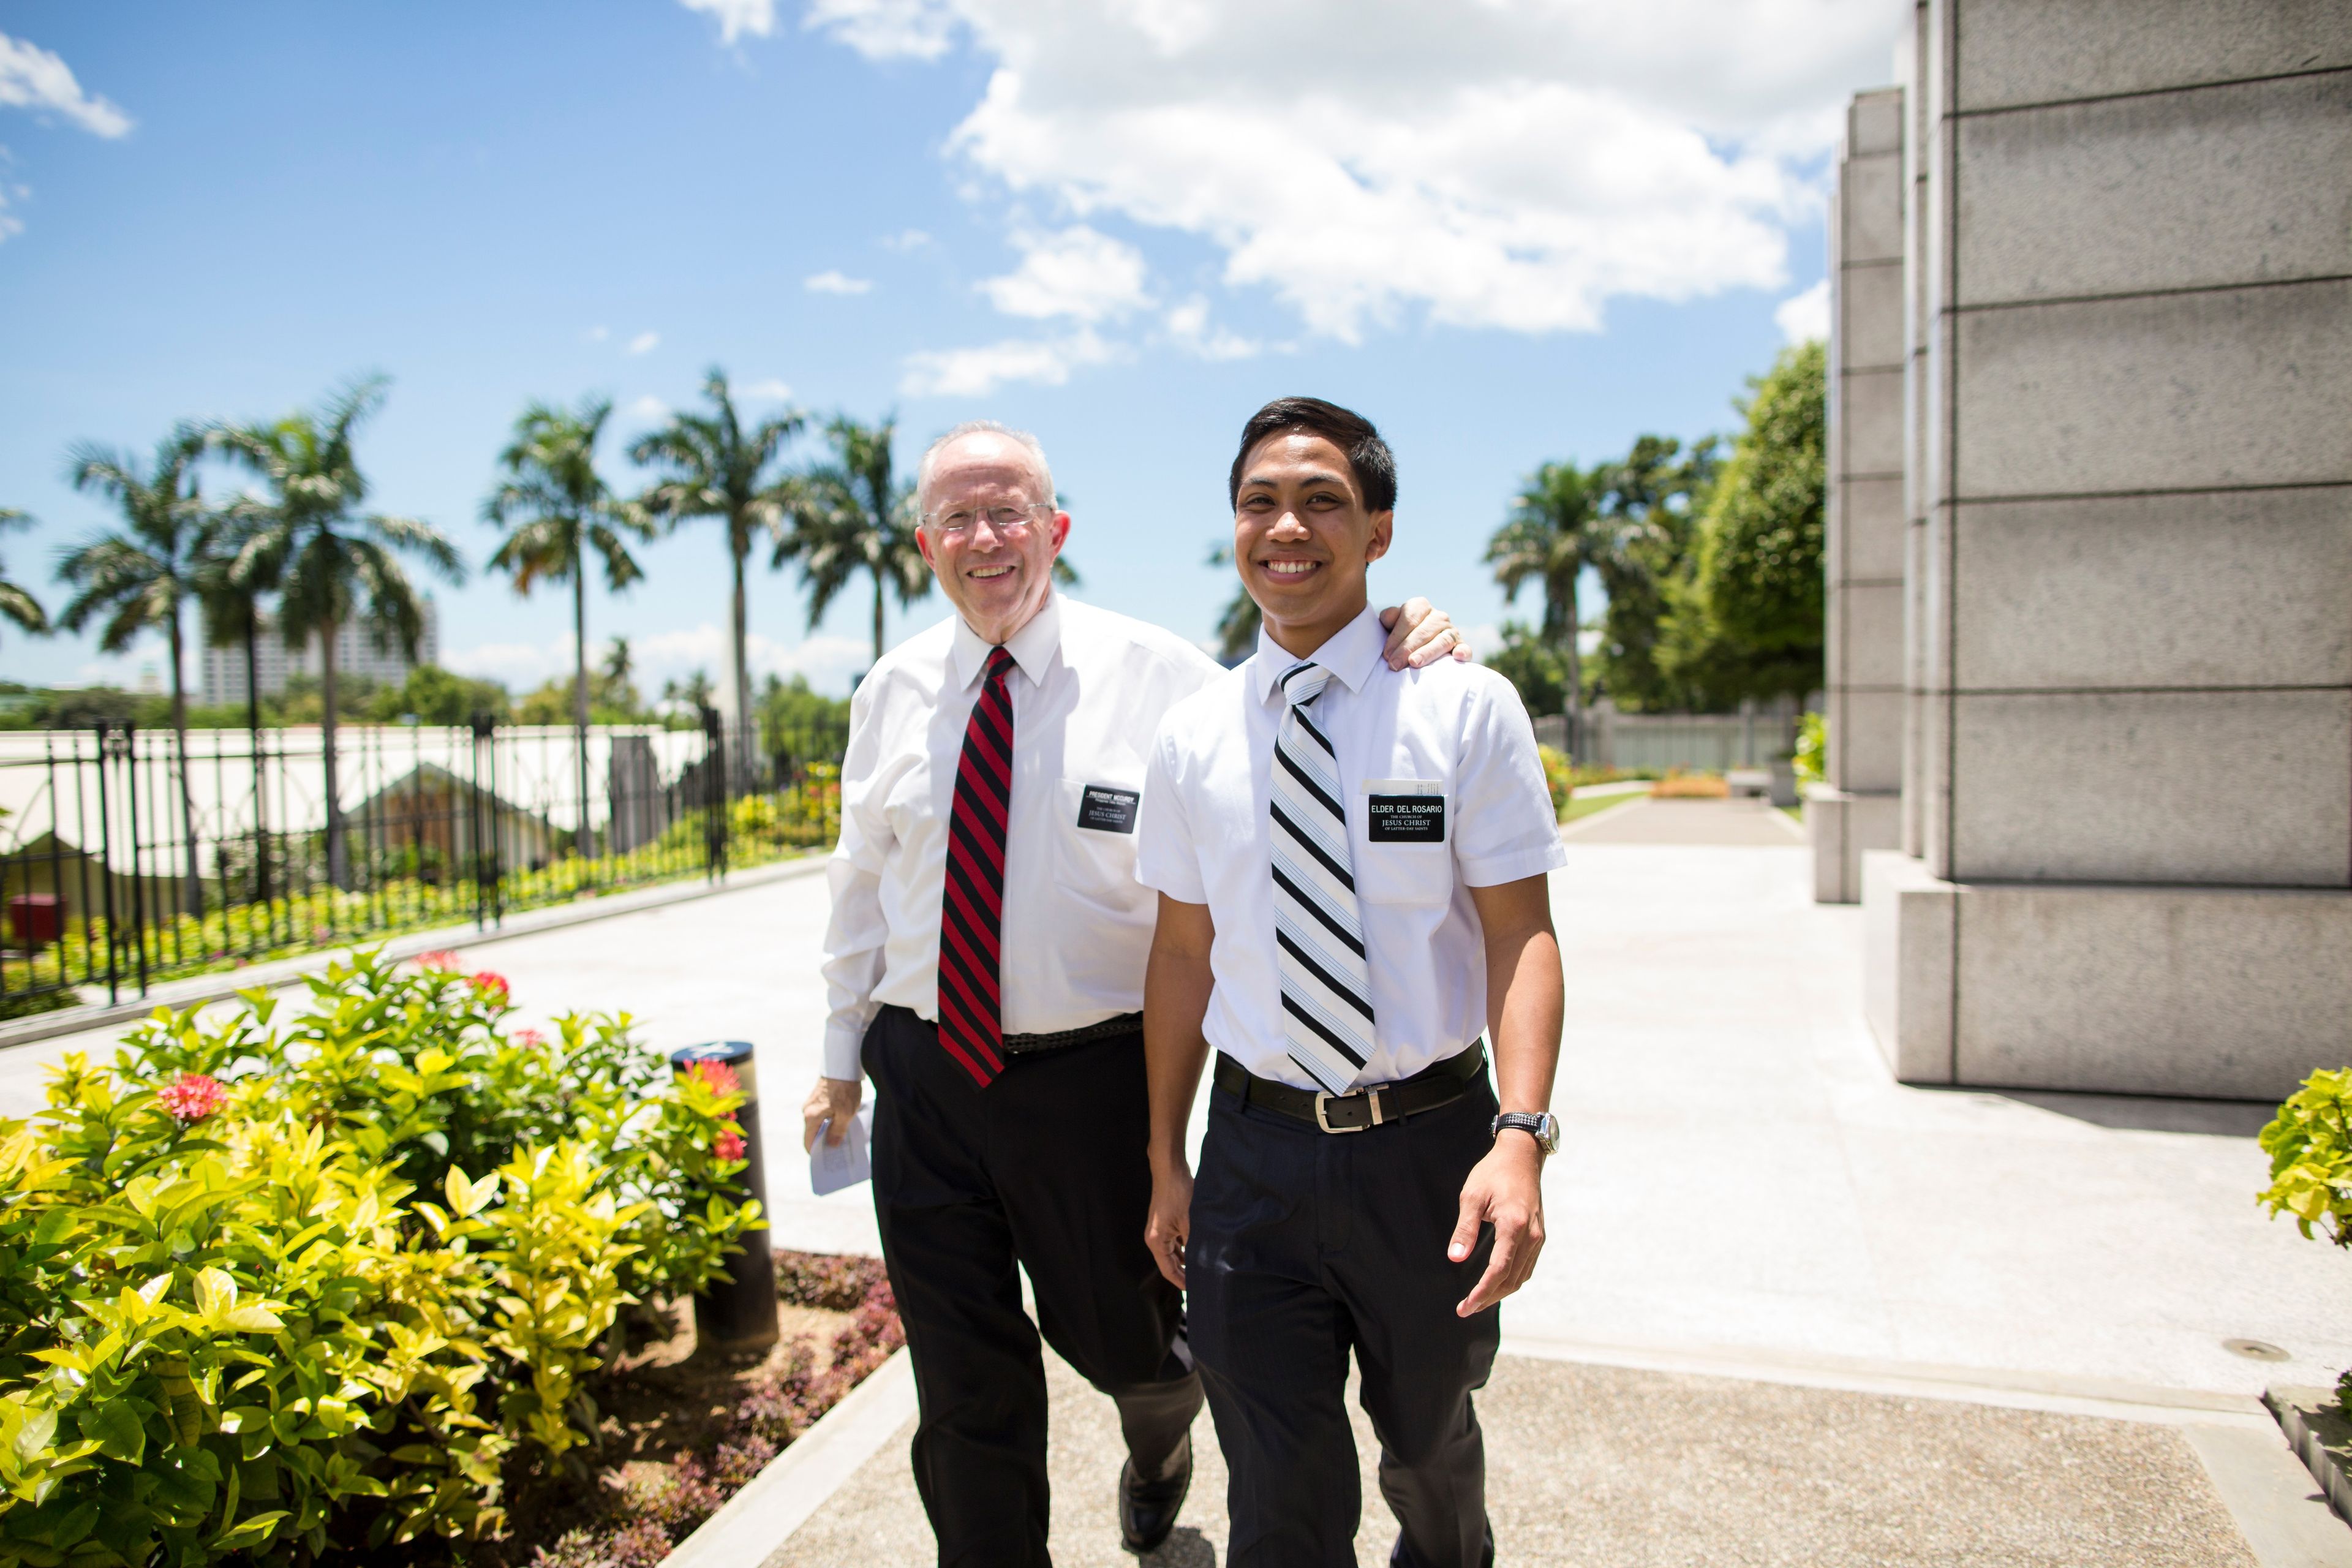 A senior elder missionary walking with a young elder missionary.